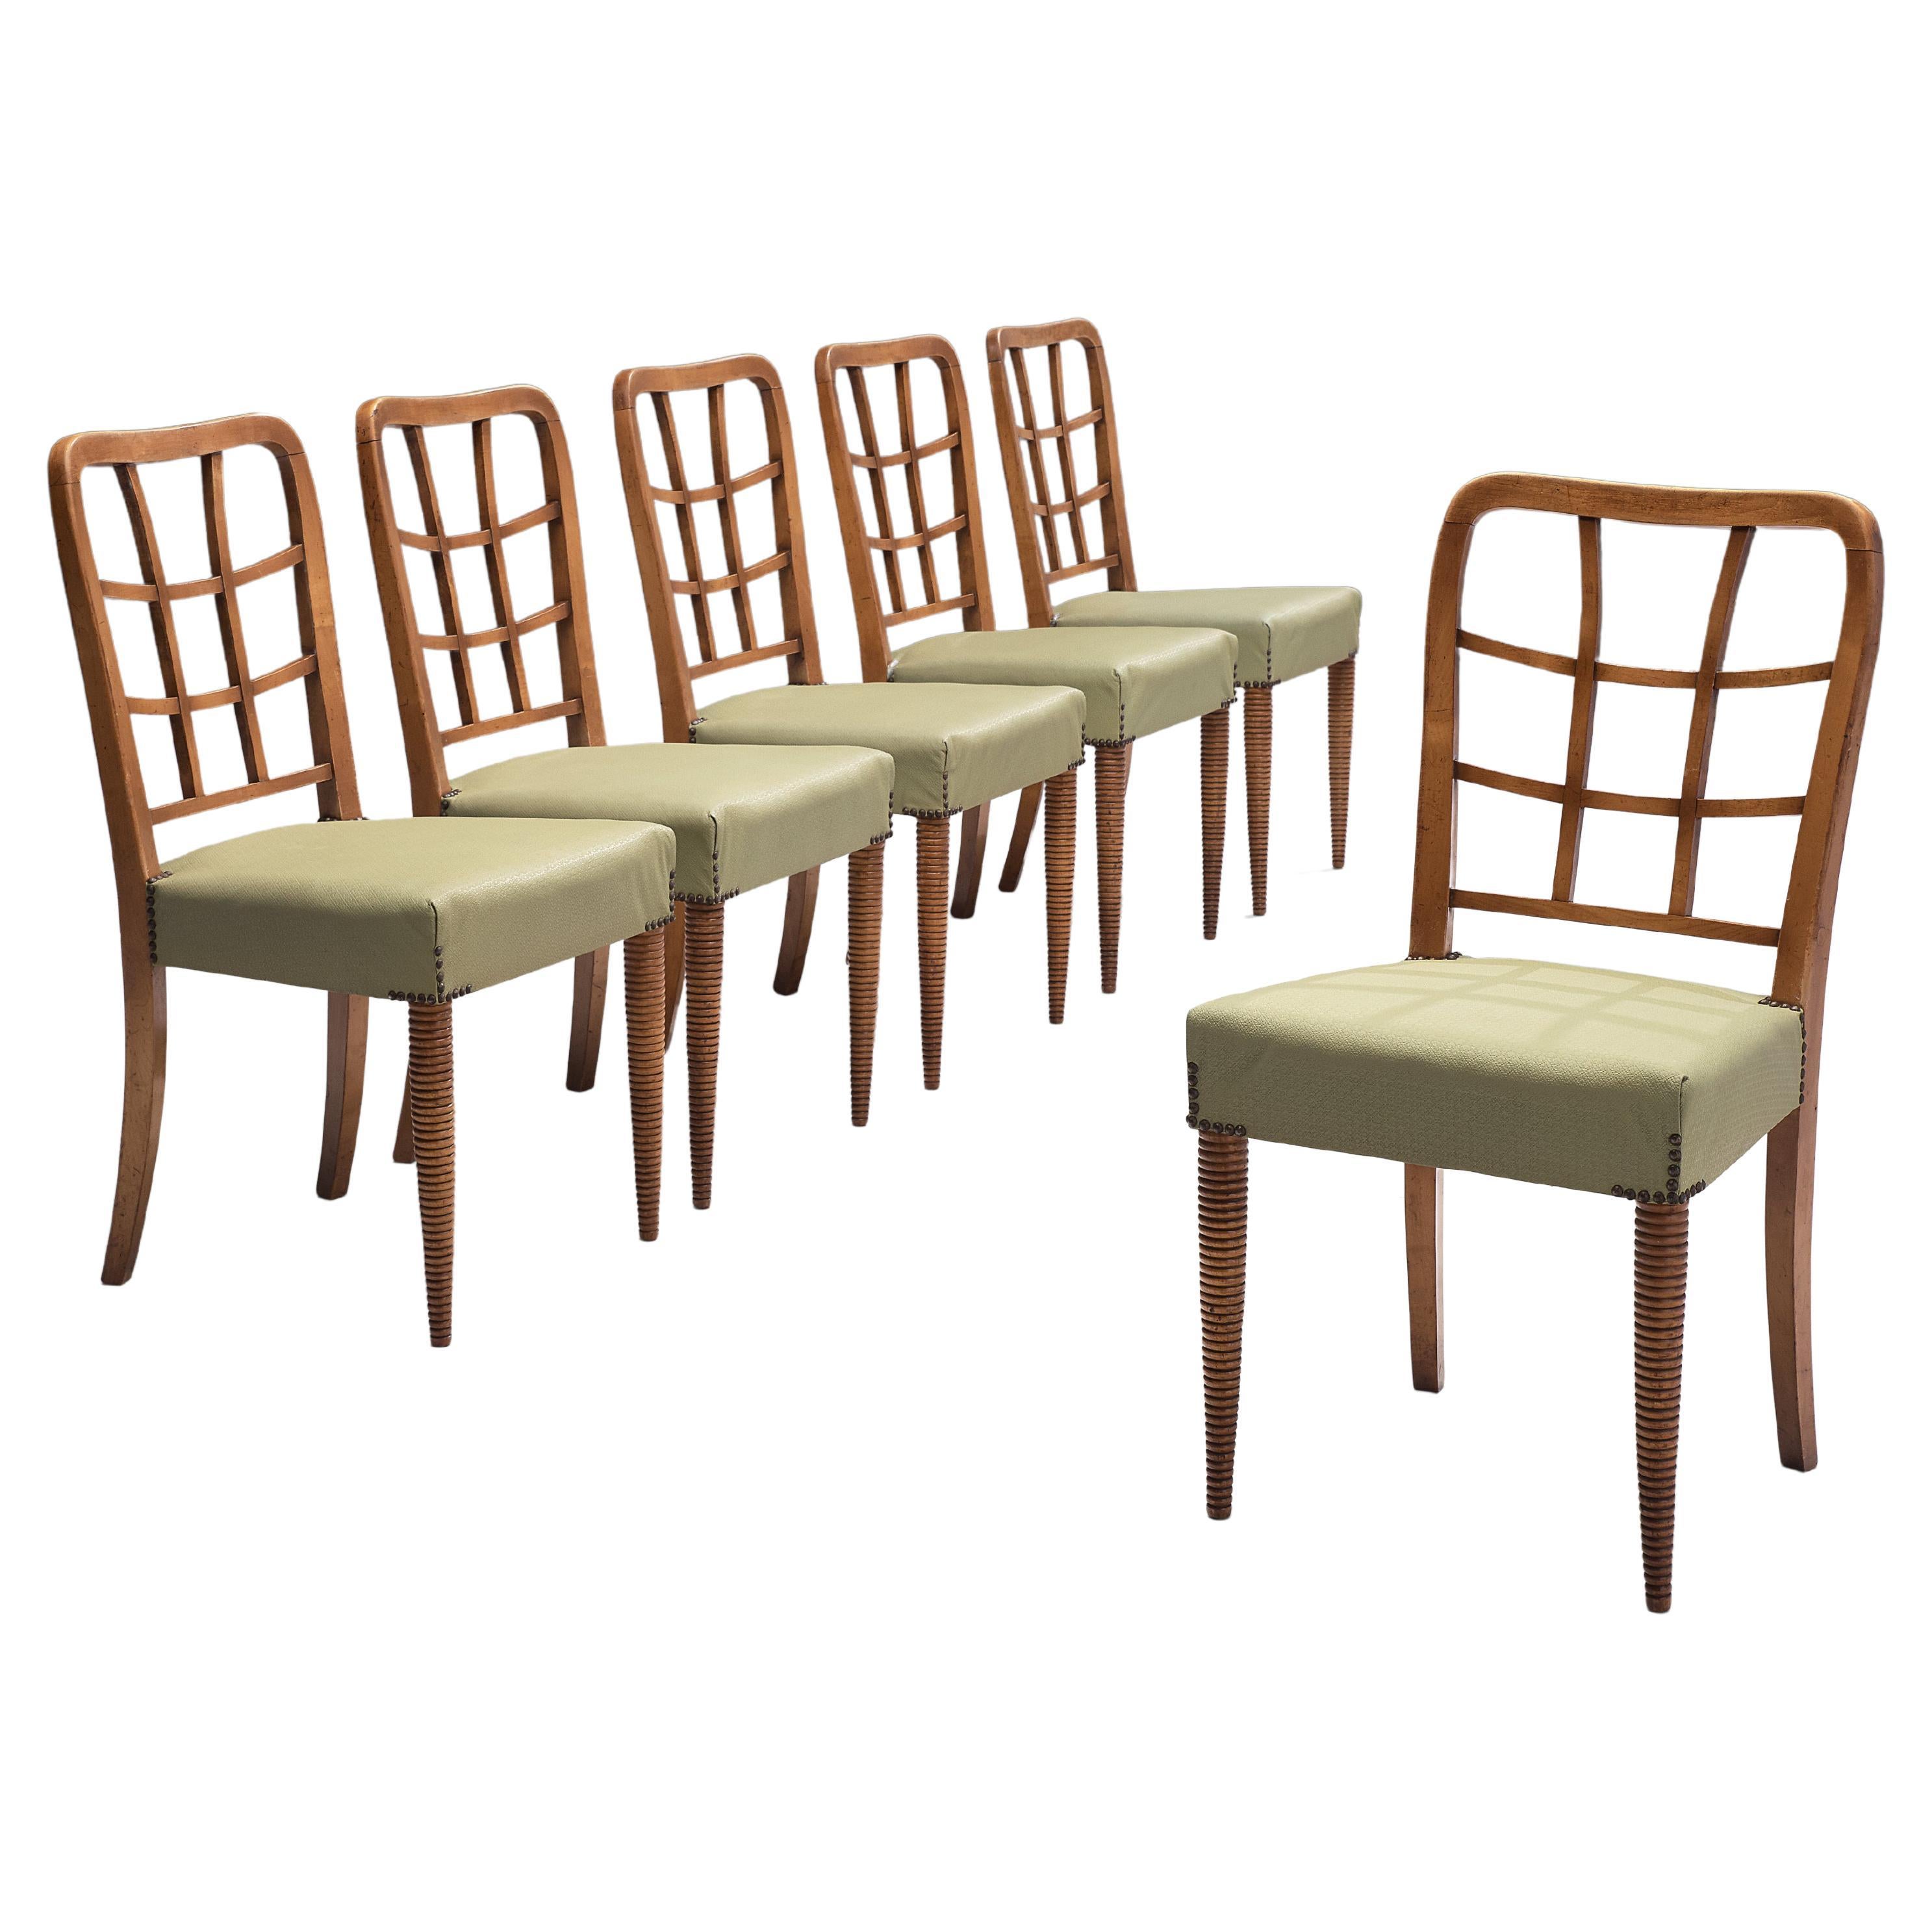 Set of Six Sculptural Italian Dining Chairs